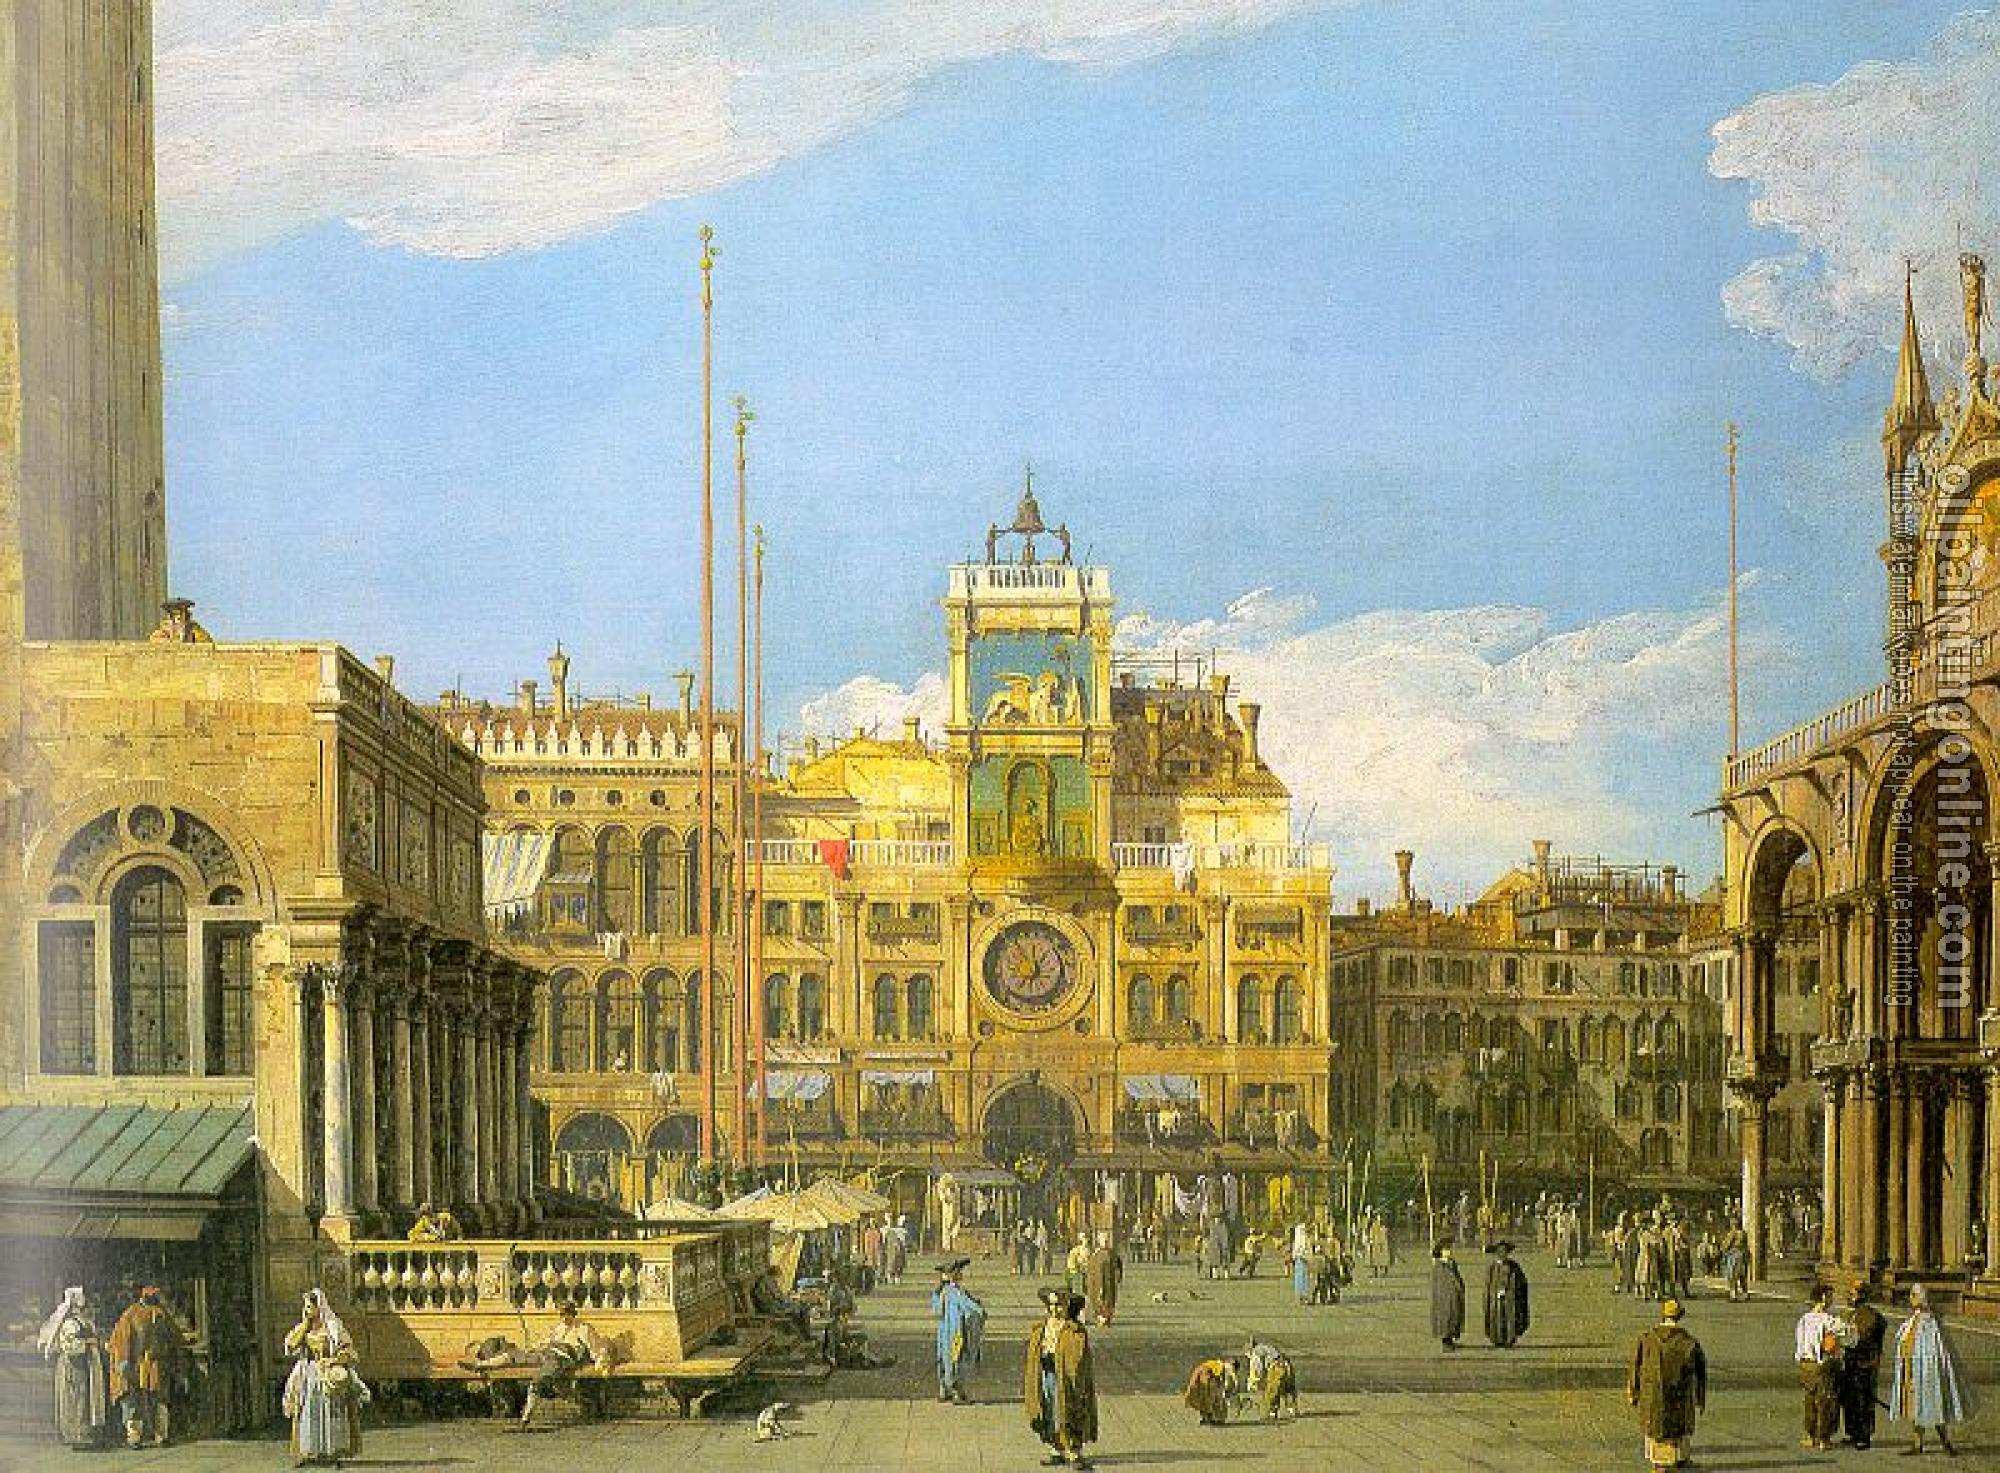 Canaletto - Piazza San Marco- Looking North